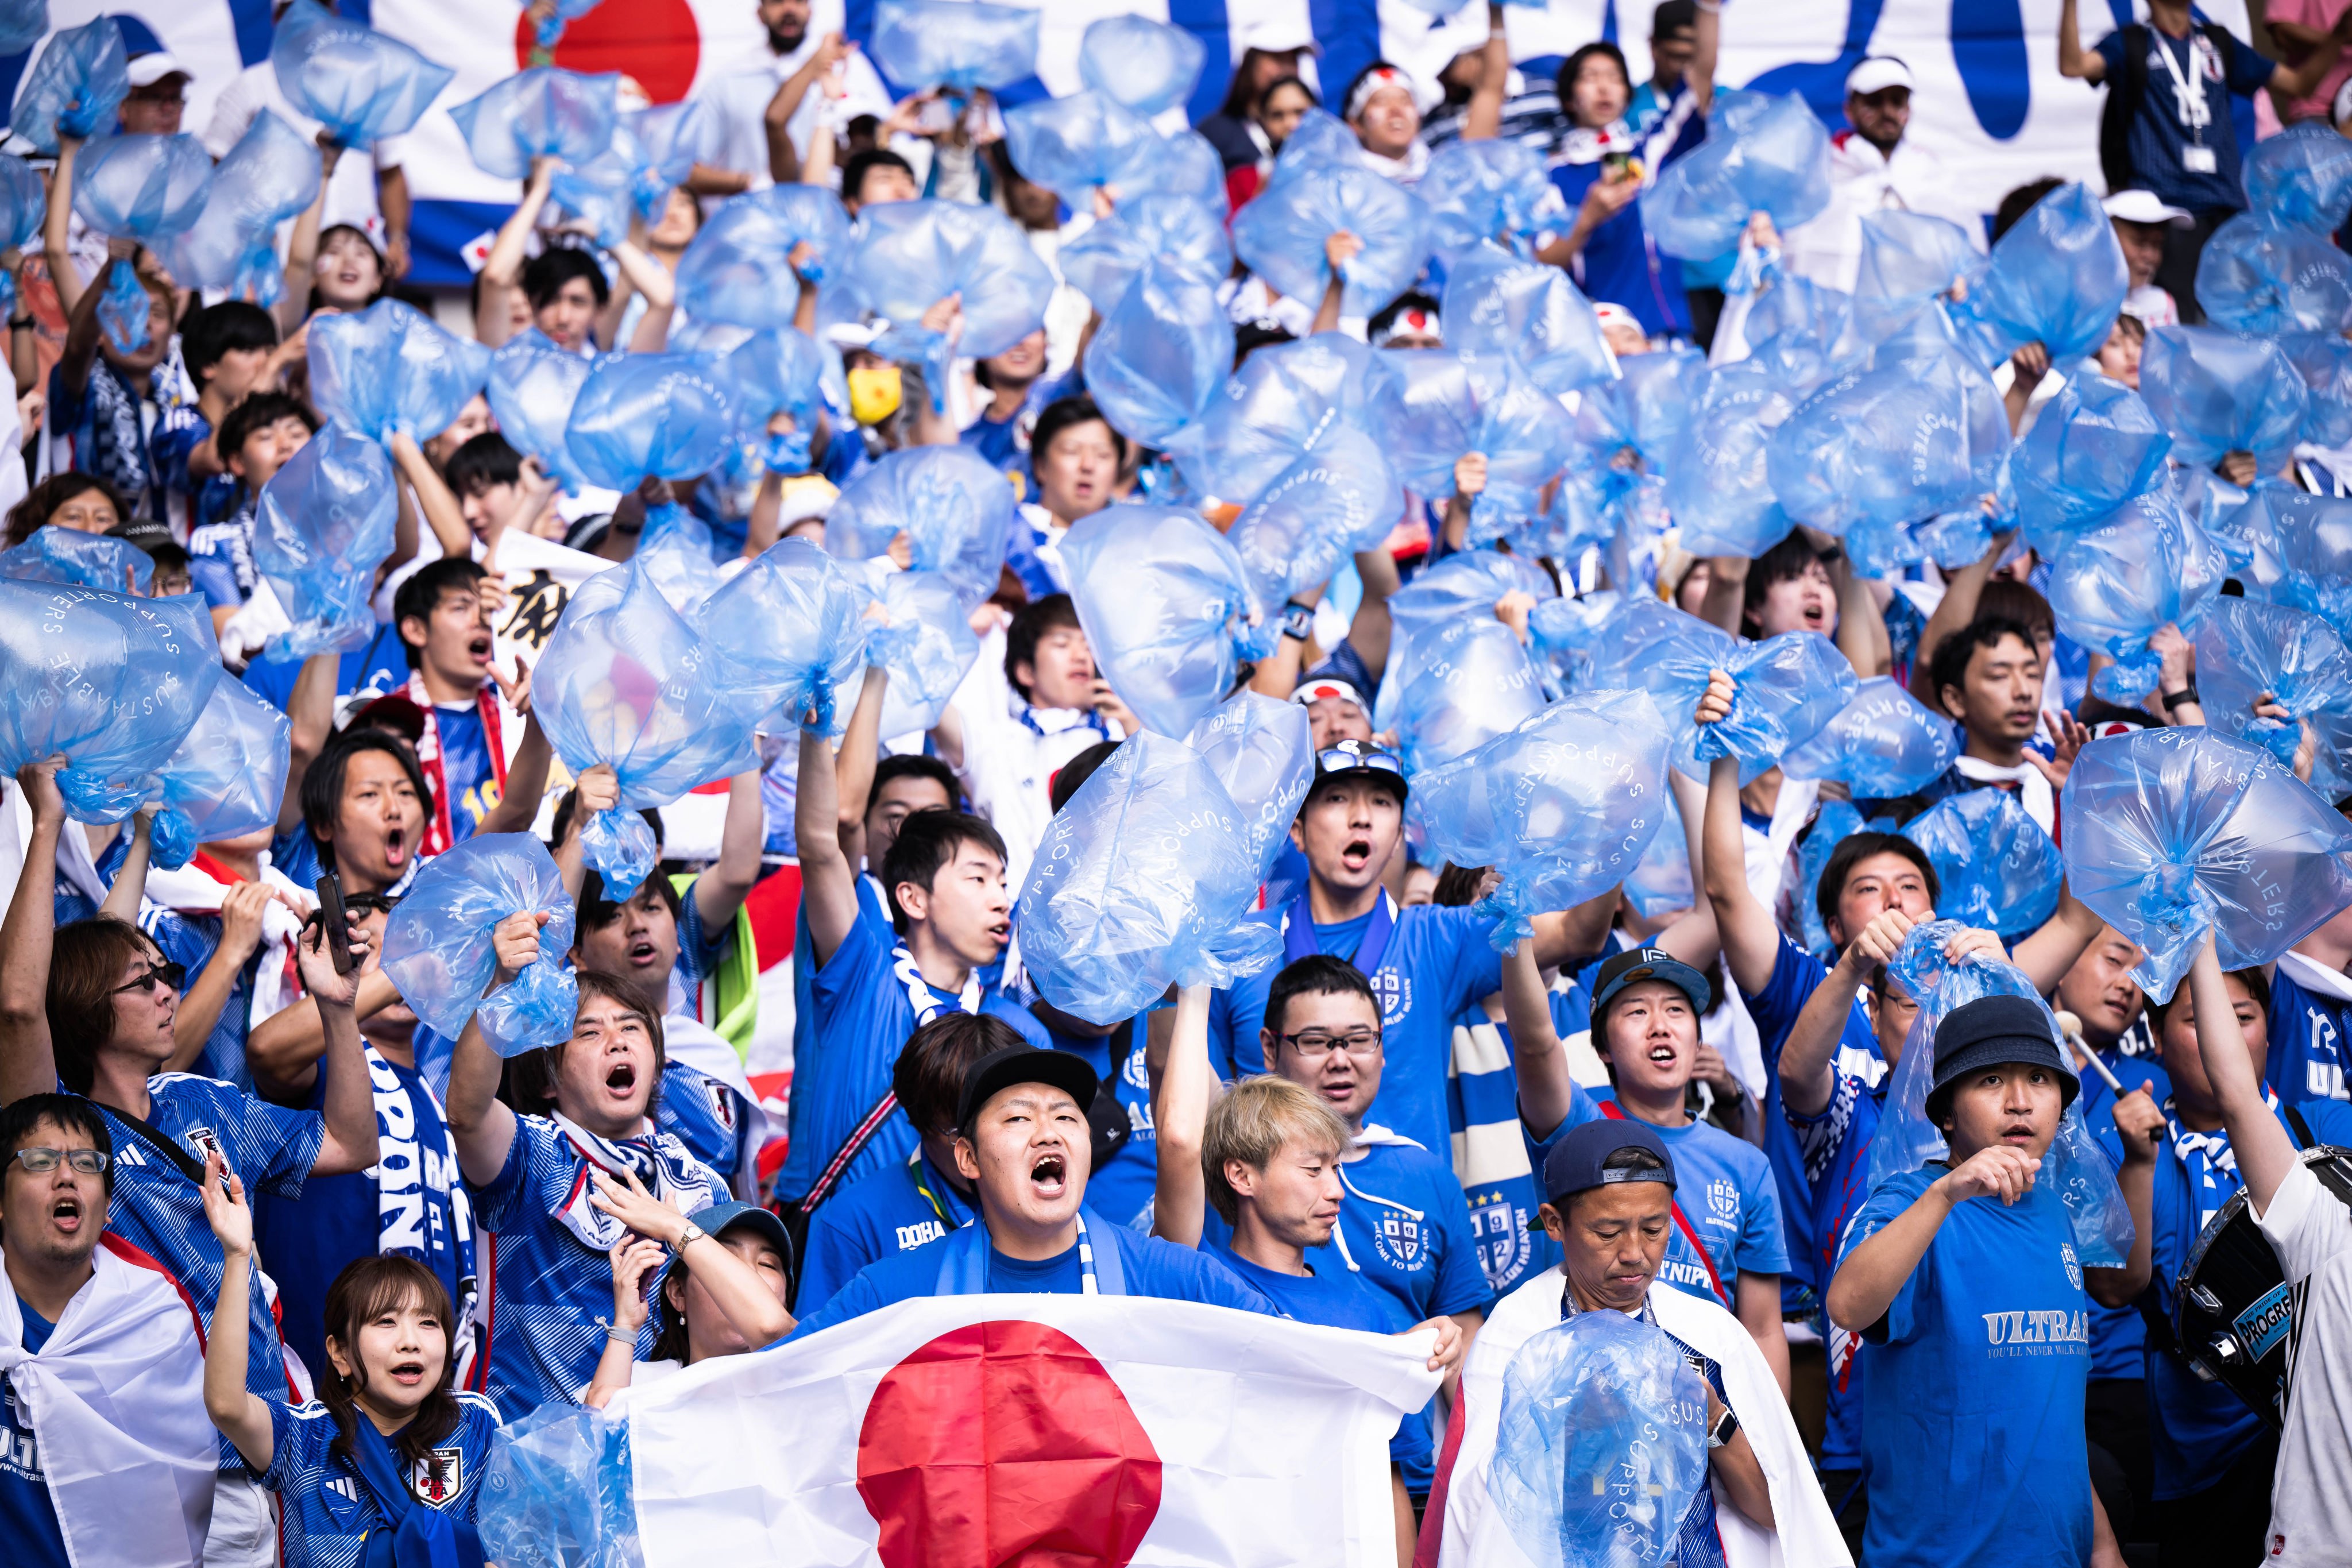 Japanese fans show the rubbish bags they brought with them for cleaning the stadium in Qatar prior to the Fifa World Cup Qatar 2022 match between Japan and Costa Rica. Photo: Marvin Ibo Guengoer - GES Sportfoto/Getty Images